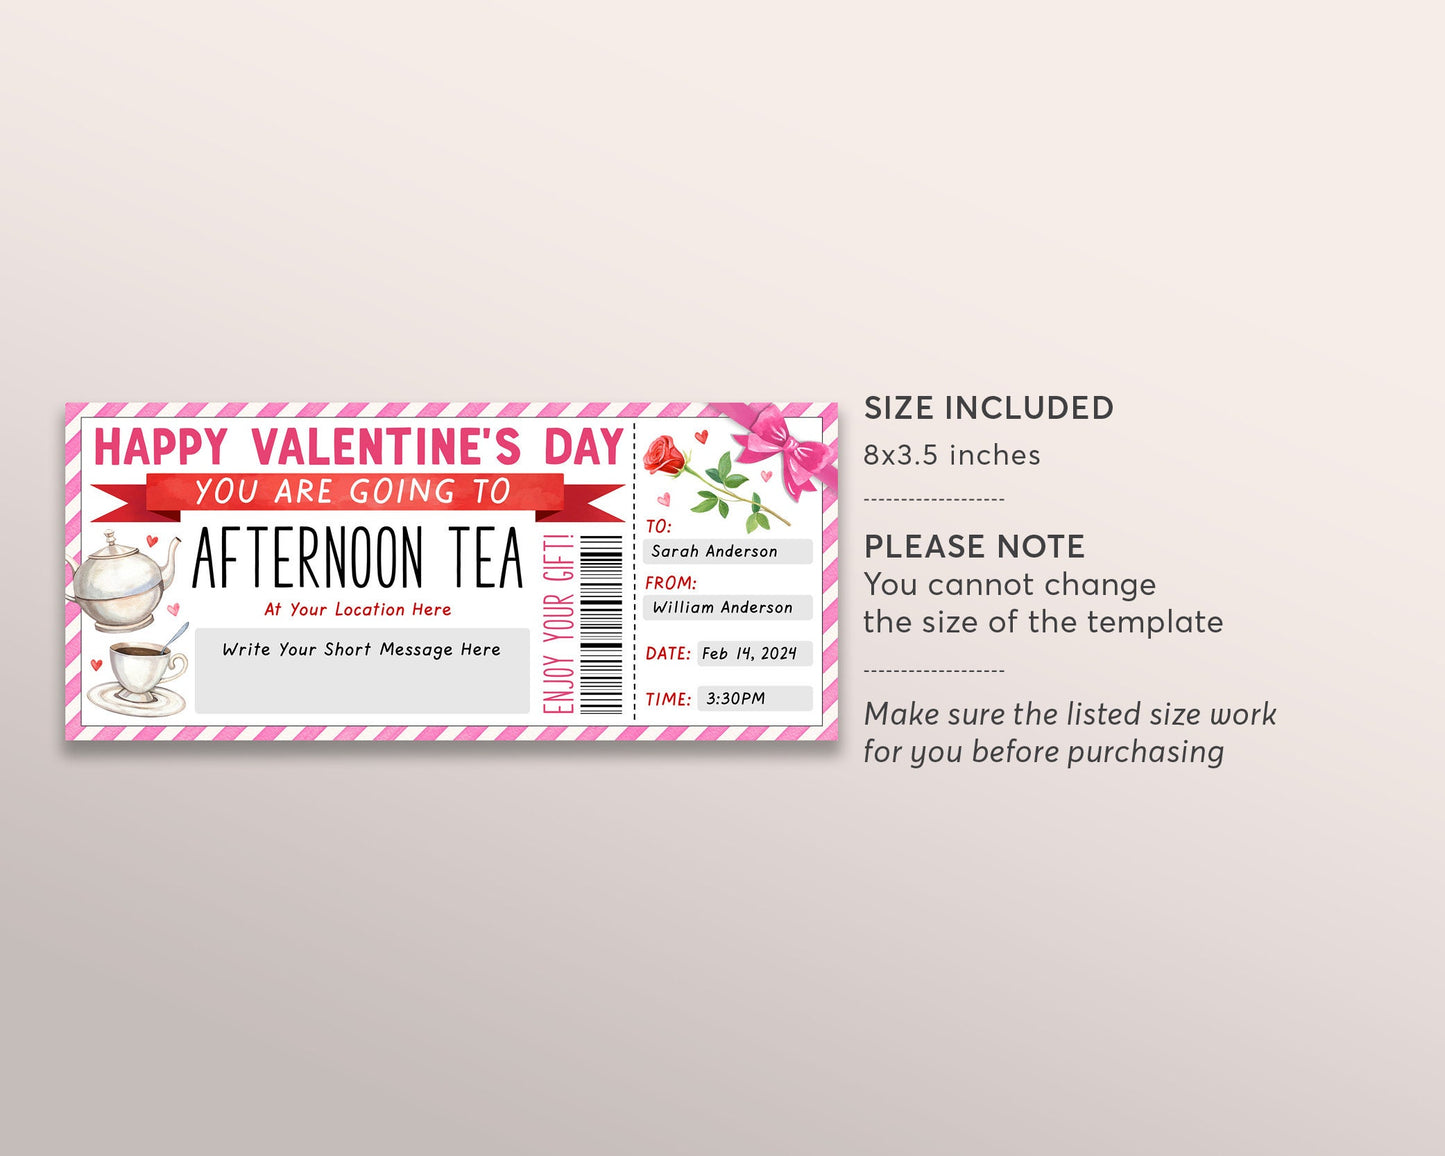 Valentines Day Afternoon Tea Gift Voucher Ticket Editable Template, Anniversary English Afternoon Tea Gift Certificate Coupon For Girlfriend